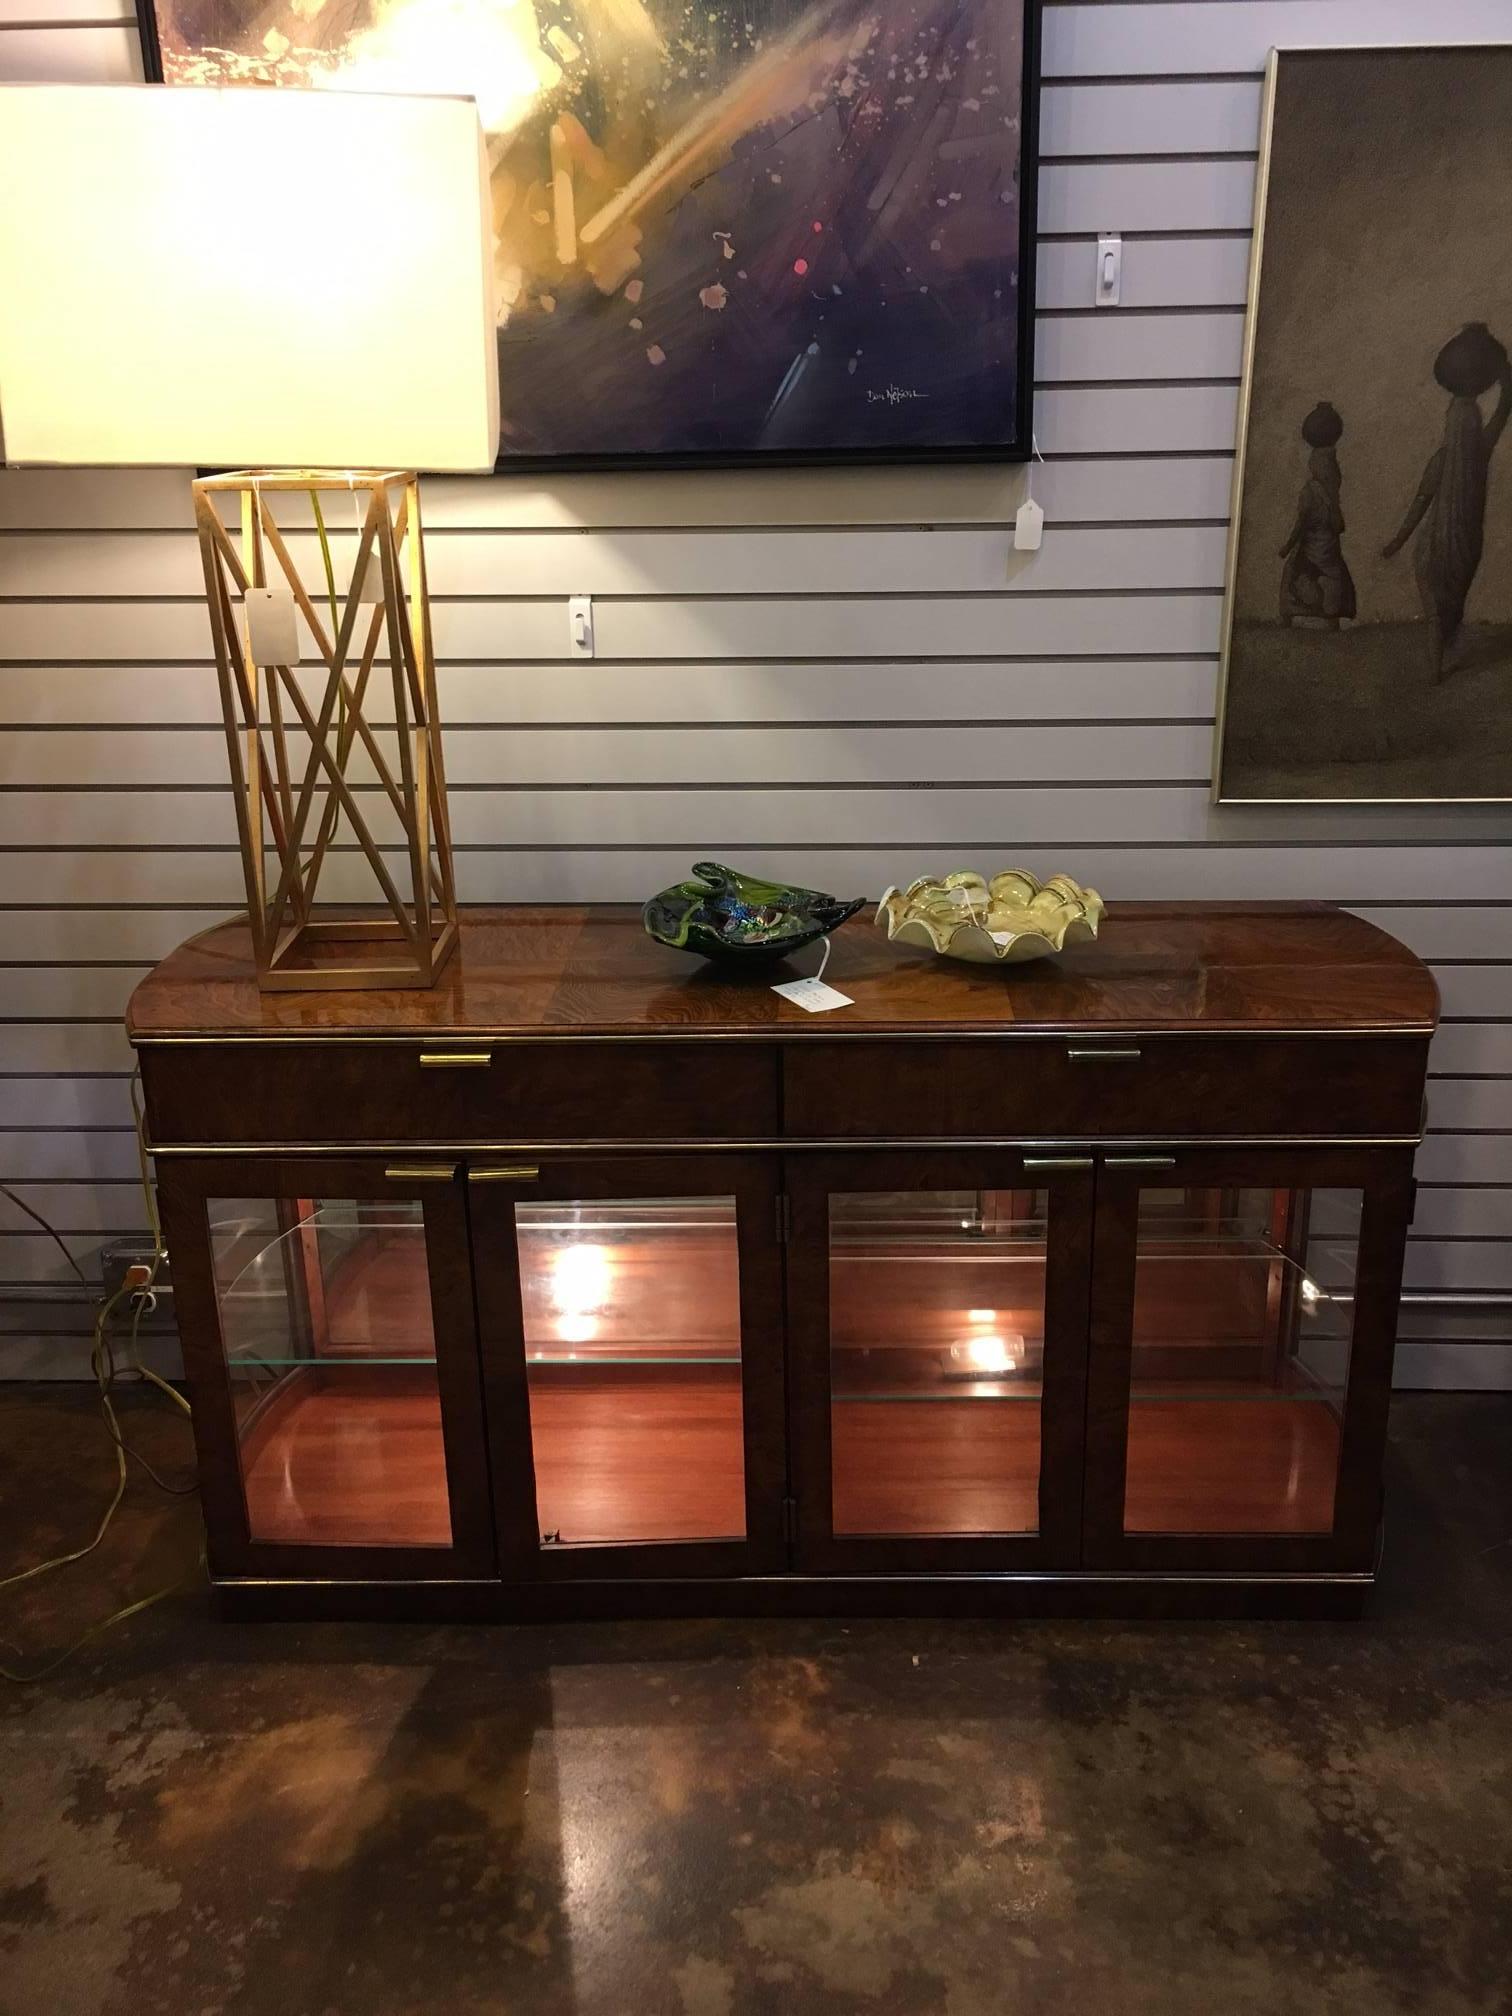 This piece is small sized making it perfect for an apartment or small study or sitting room. It is made of gorgeous burl wood and glass with brass trim. It features a lighted interior with glass shelves, making it idea for showcasing artifacts,